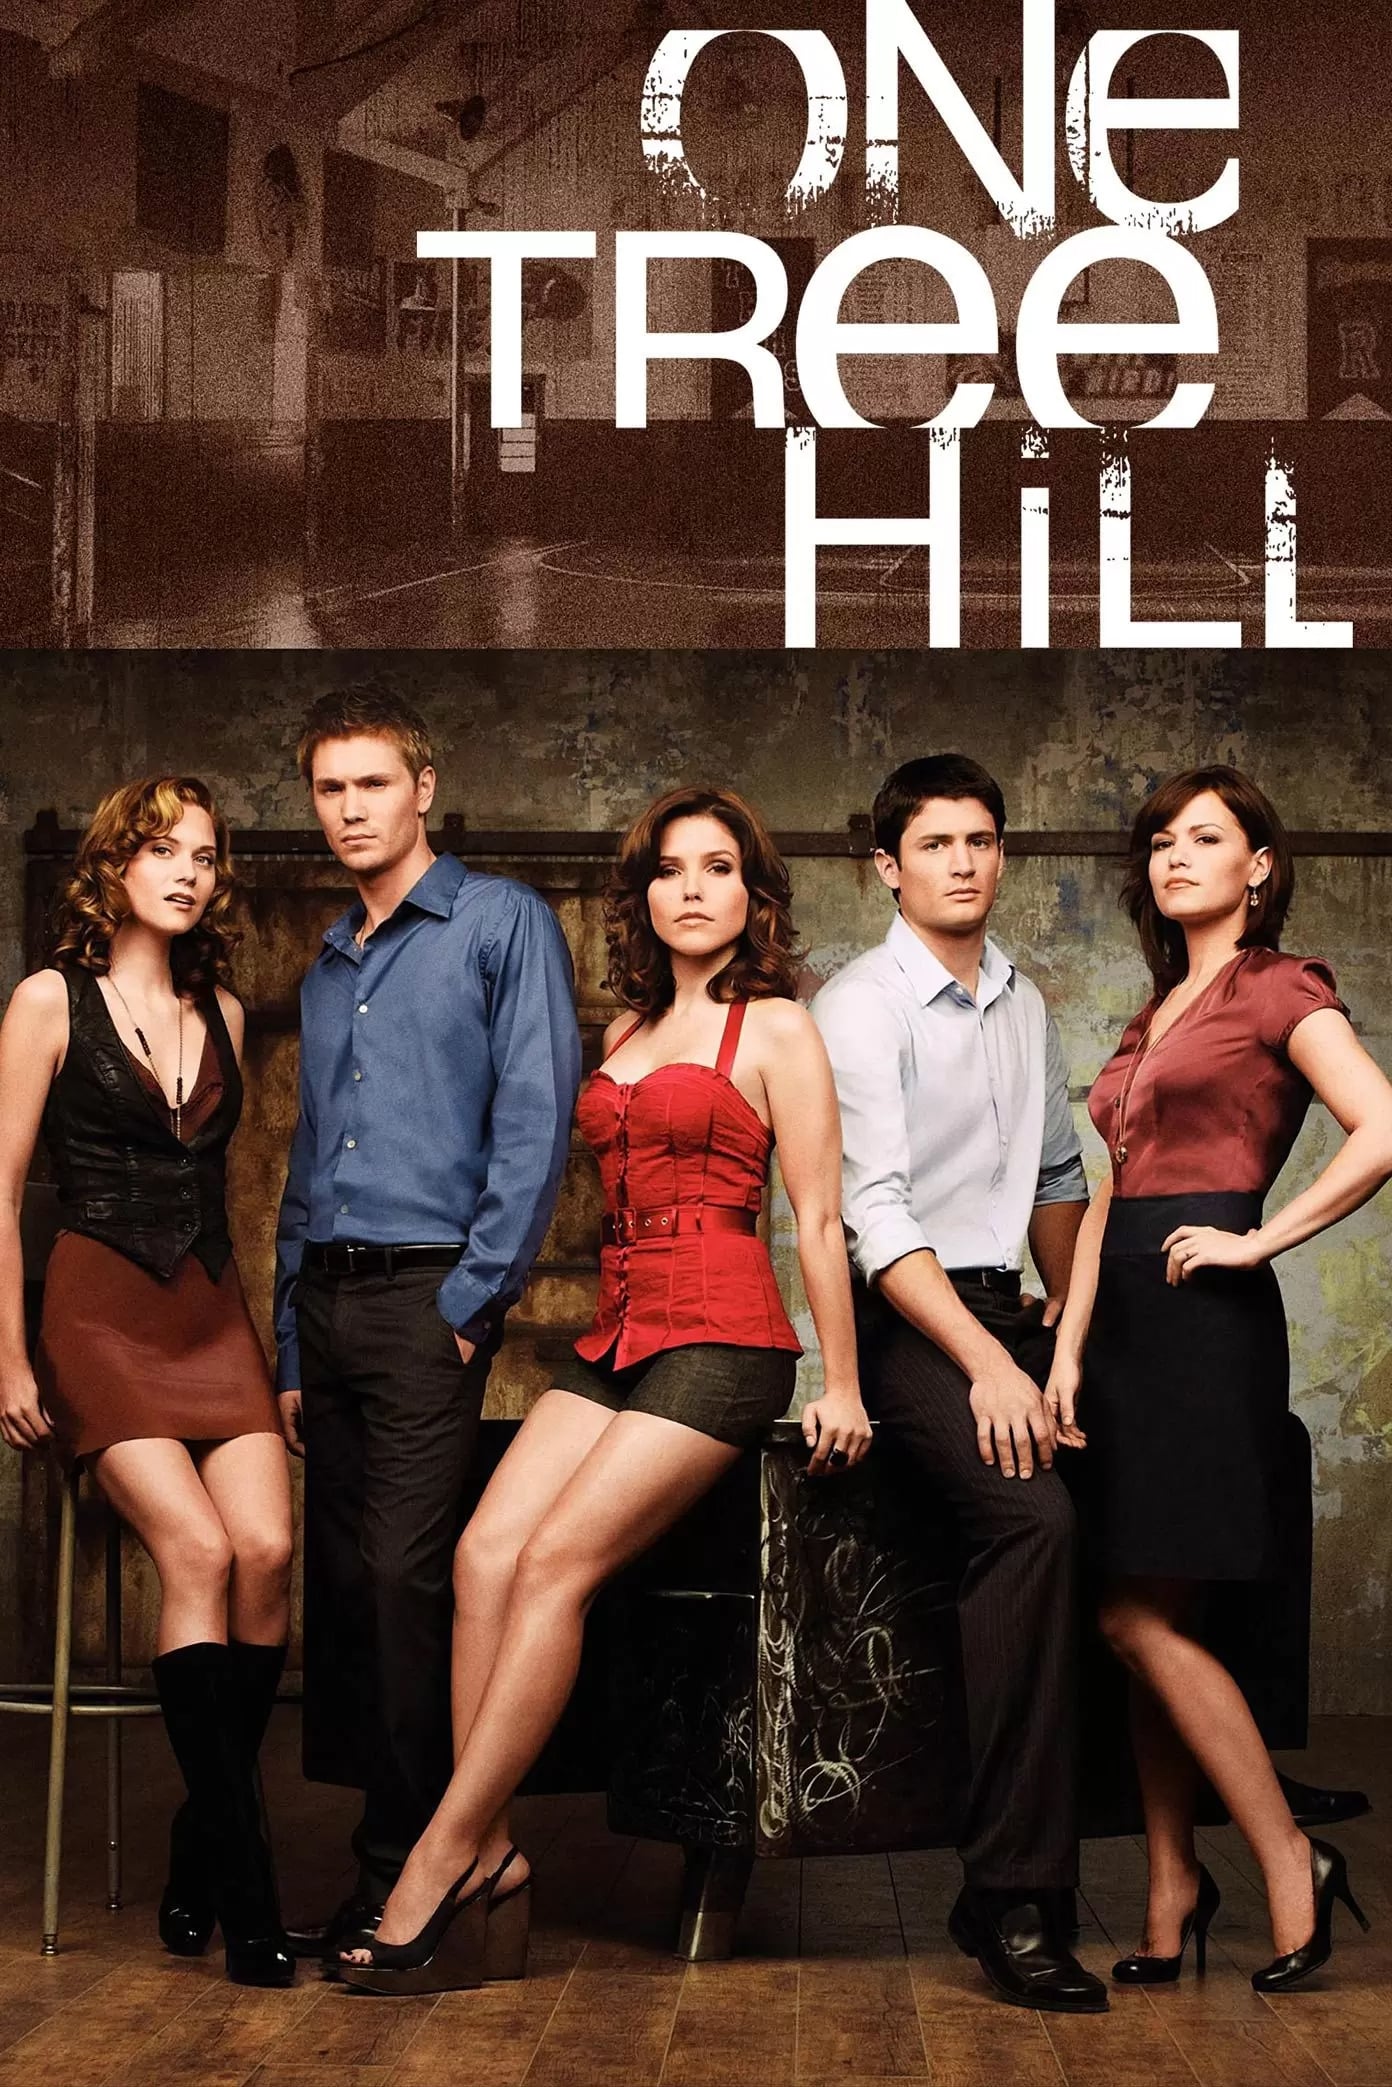 One Tree Hill (2003)